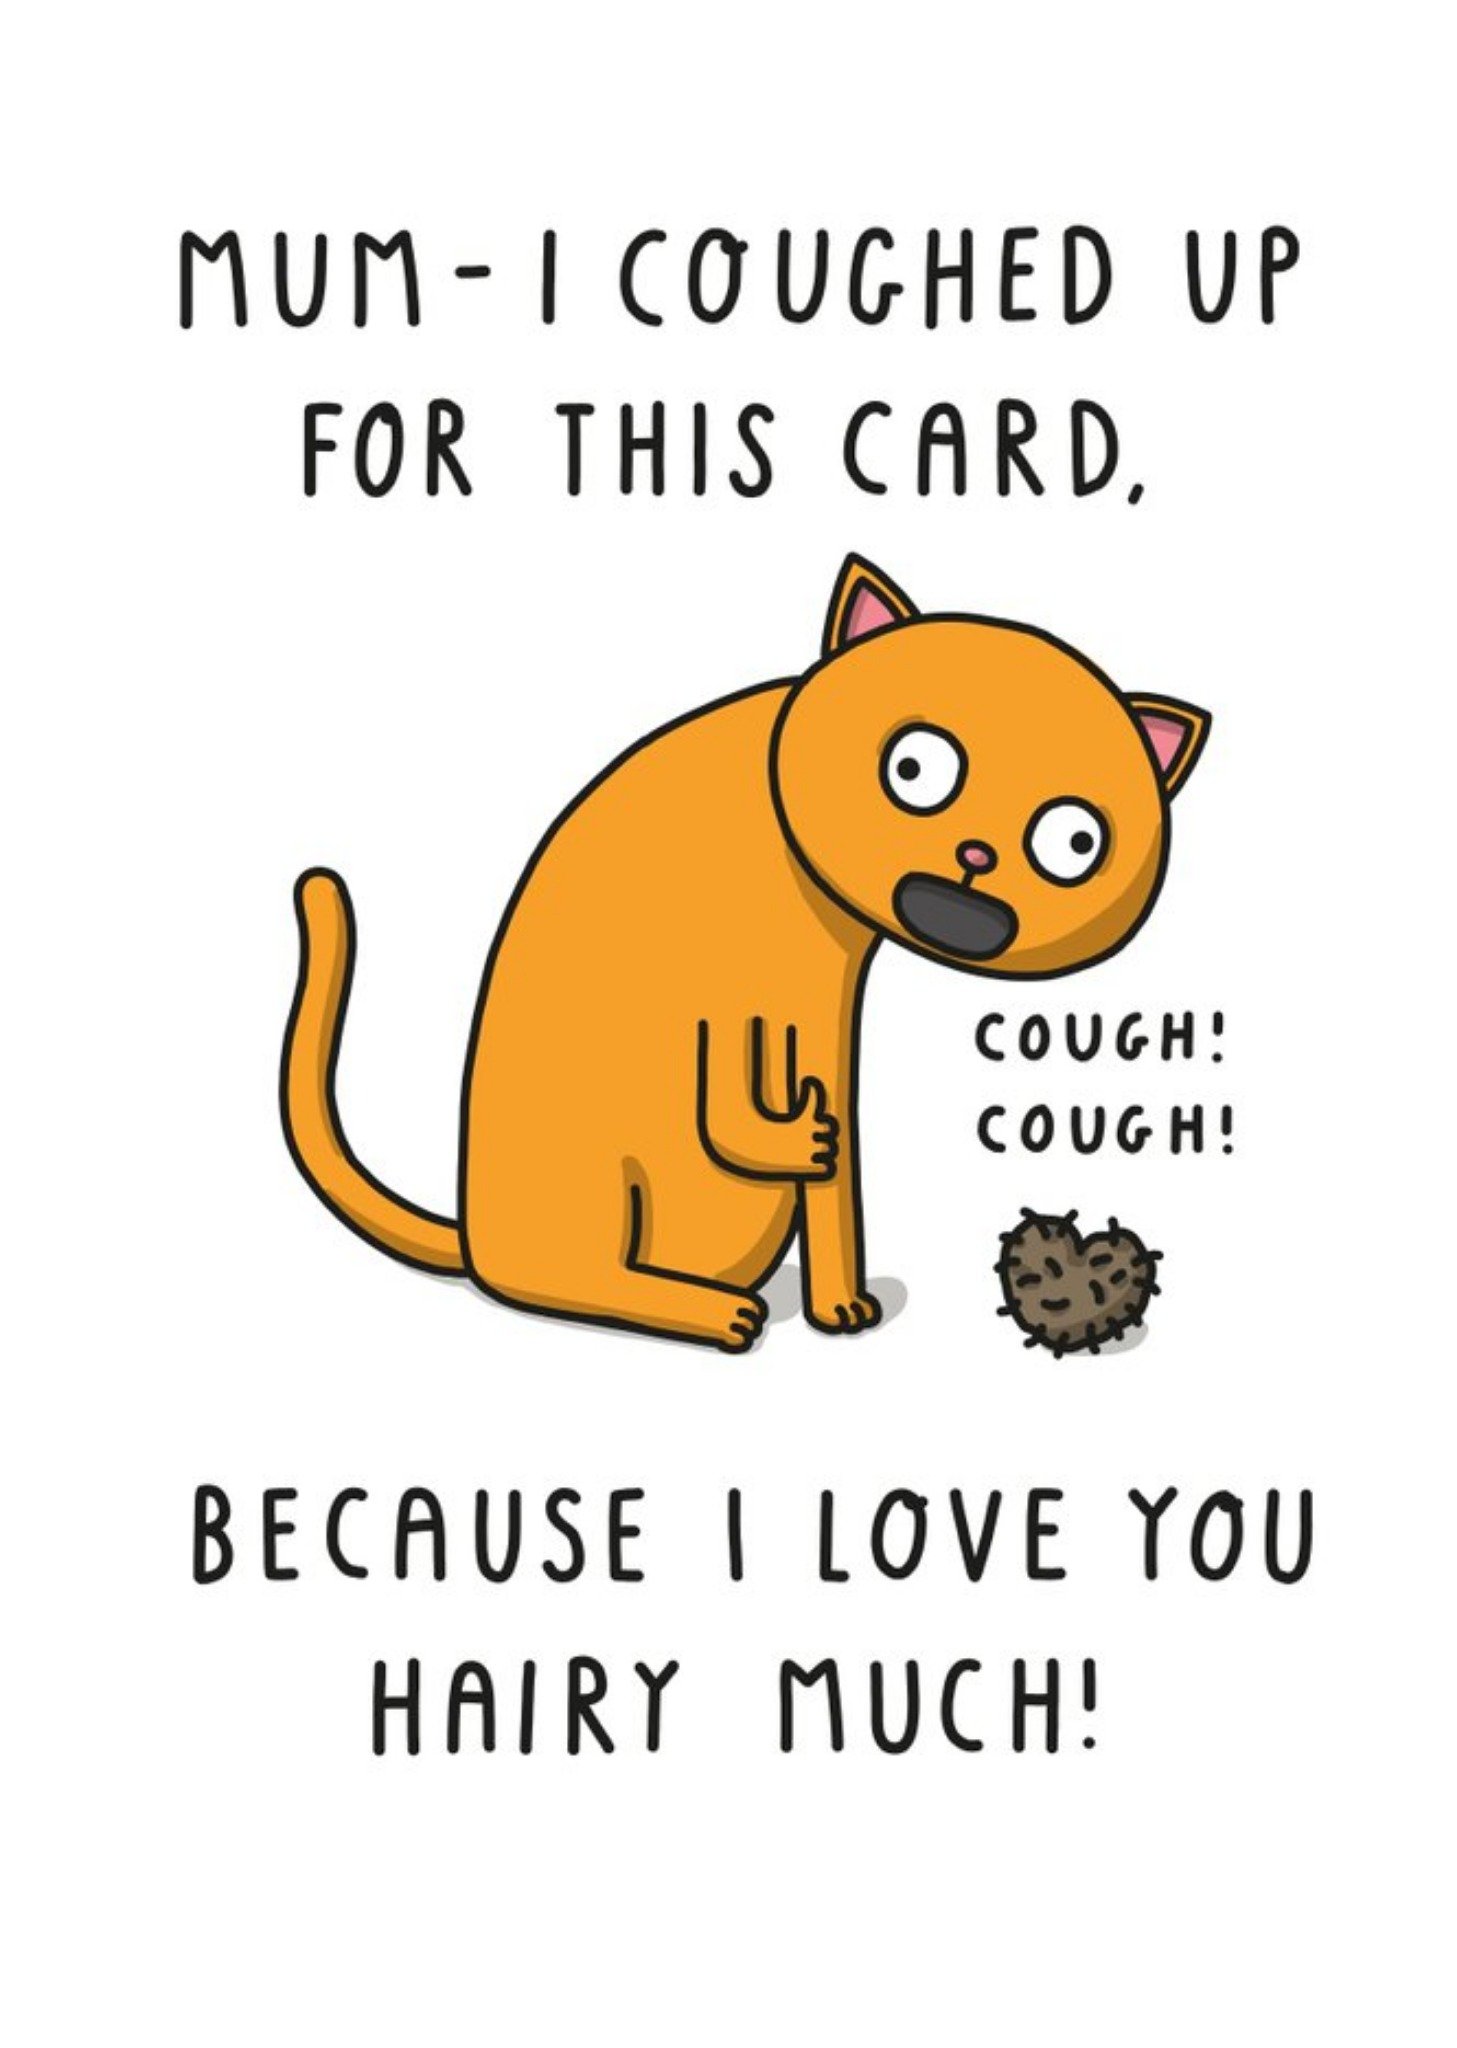 Moonpig Illustration Of A Cat Coughing Up A Fur Ball From The Cat Funny Pun Mother's Day Card Ecard